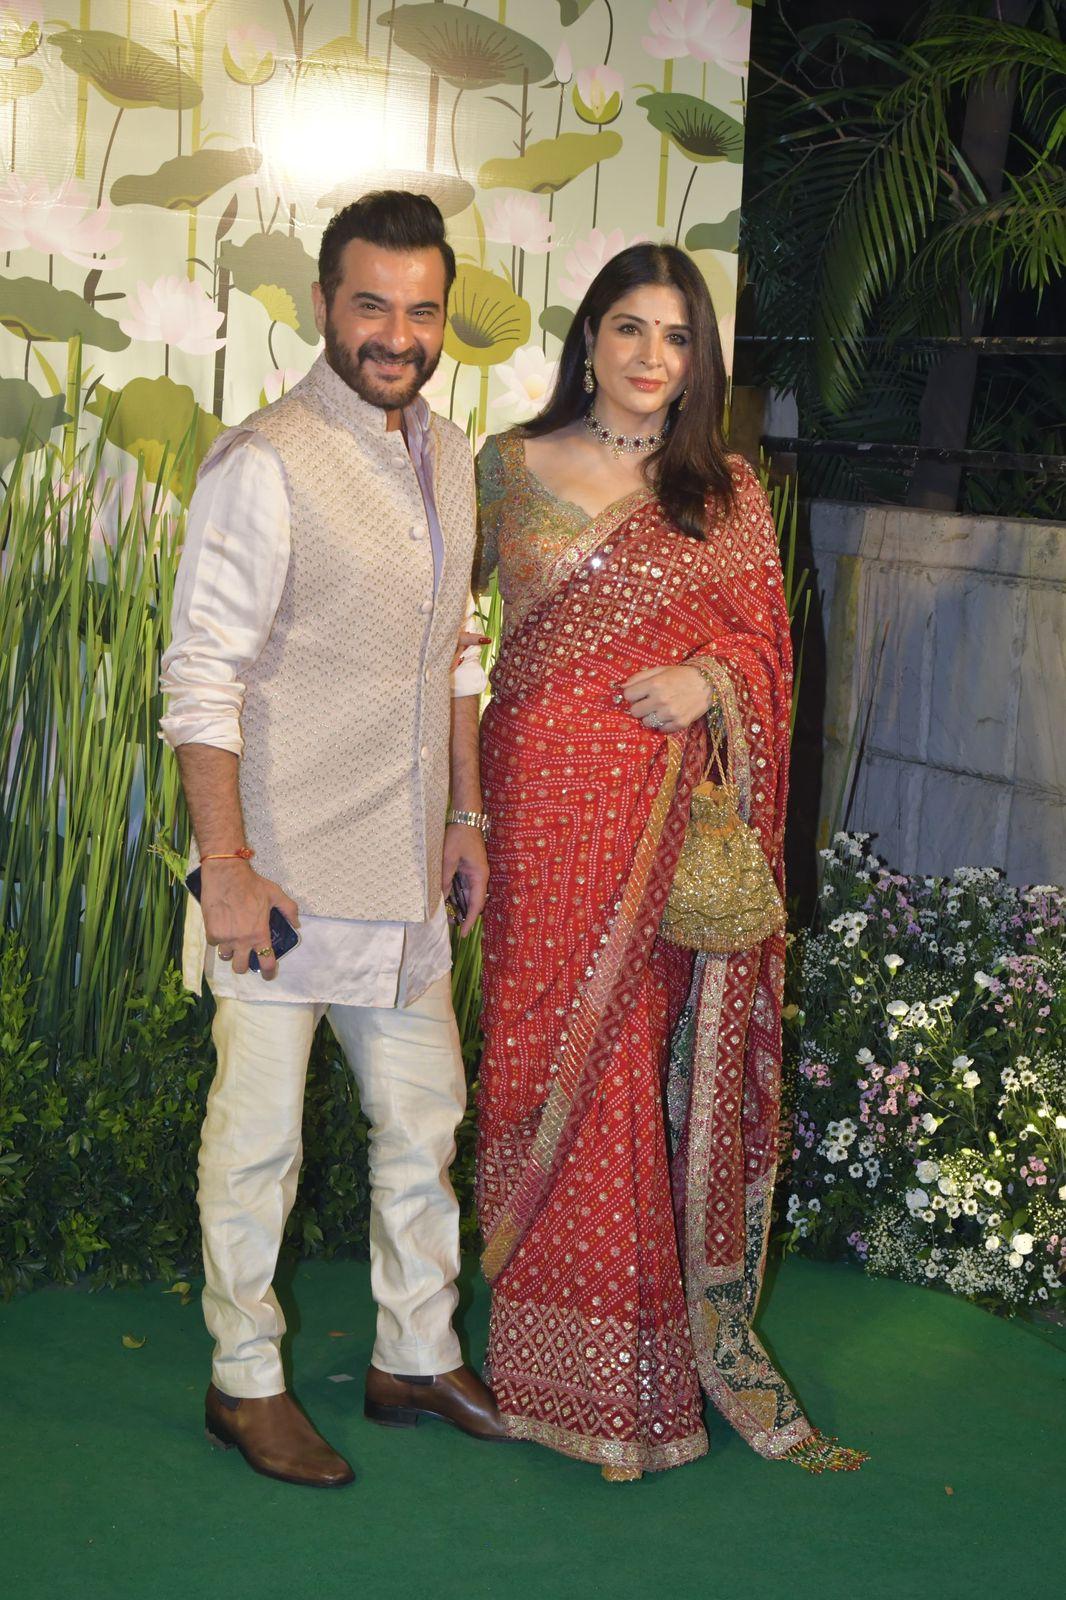 Maheep and Sanjay Kapoor brought their festive best to the party